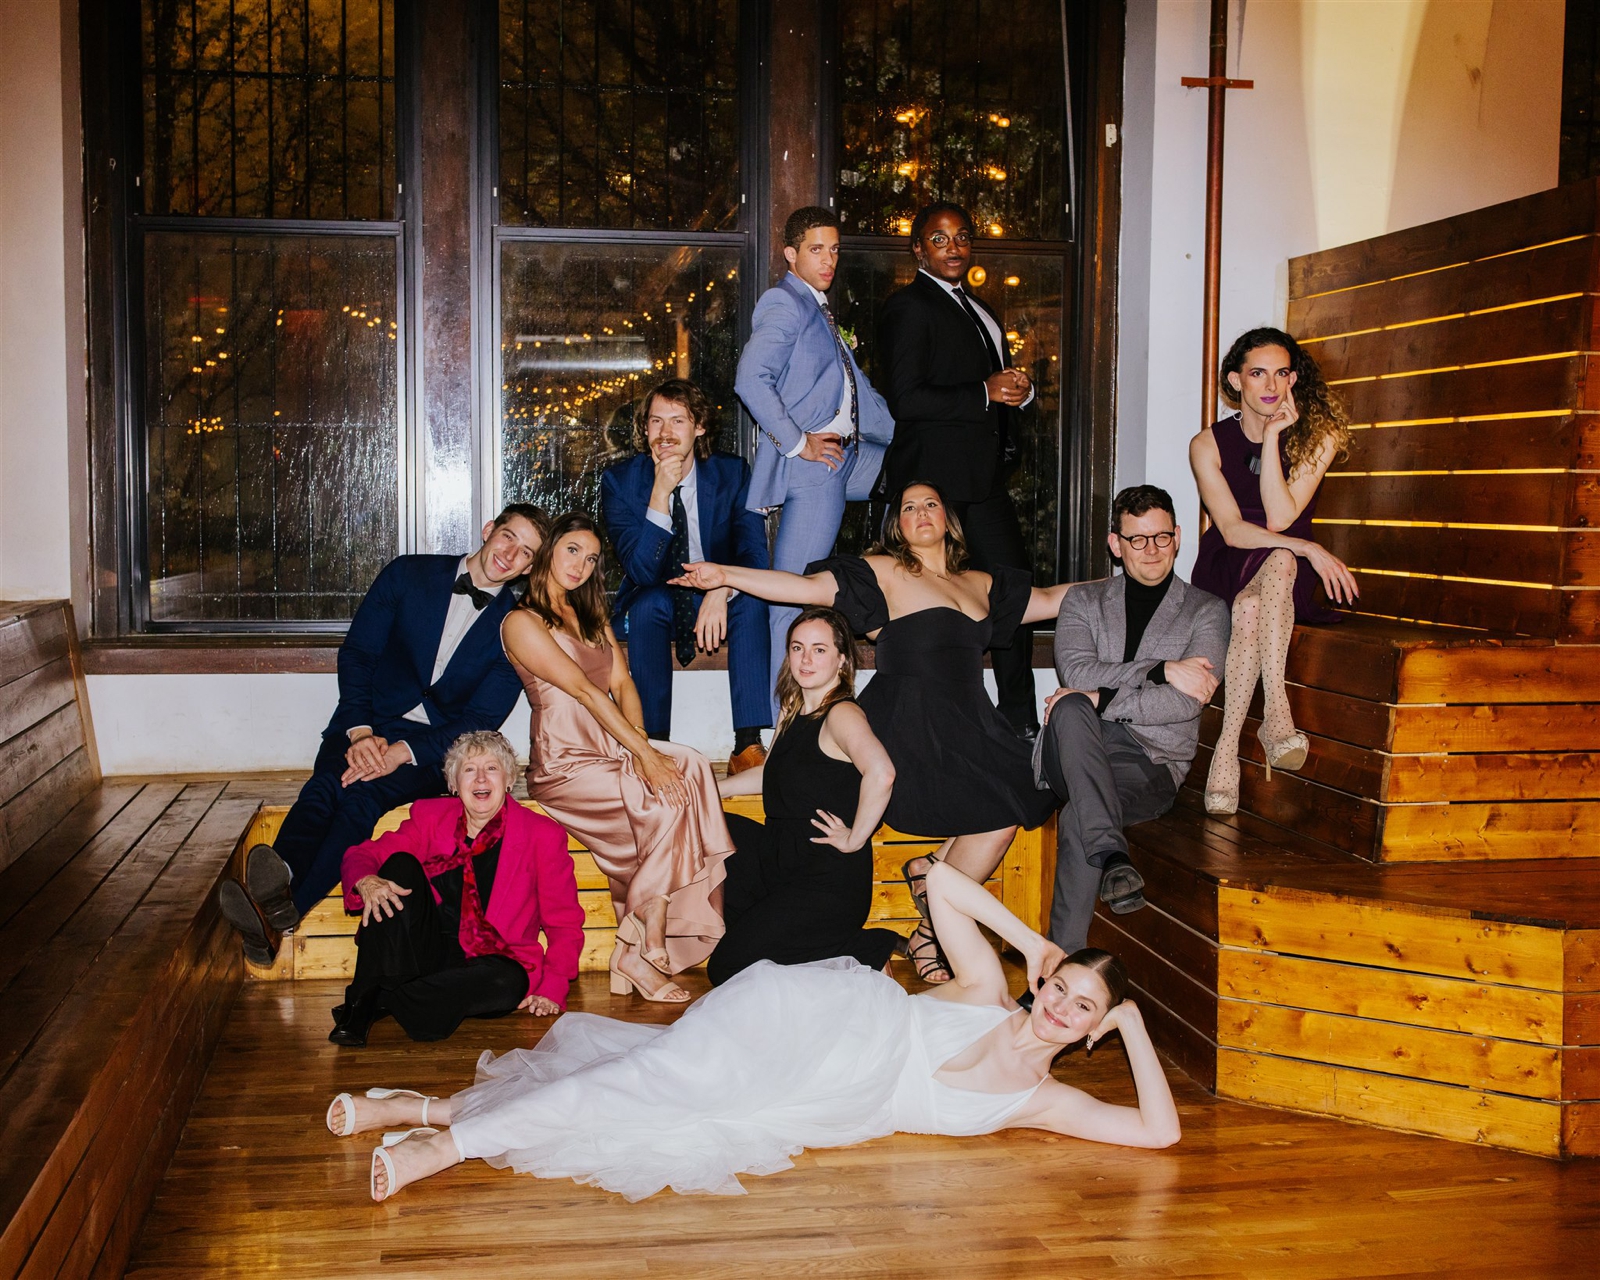 Lacuna Artists Lofts Chicago; 2023 wedding trends